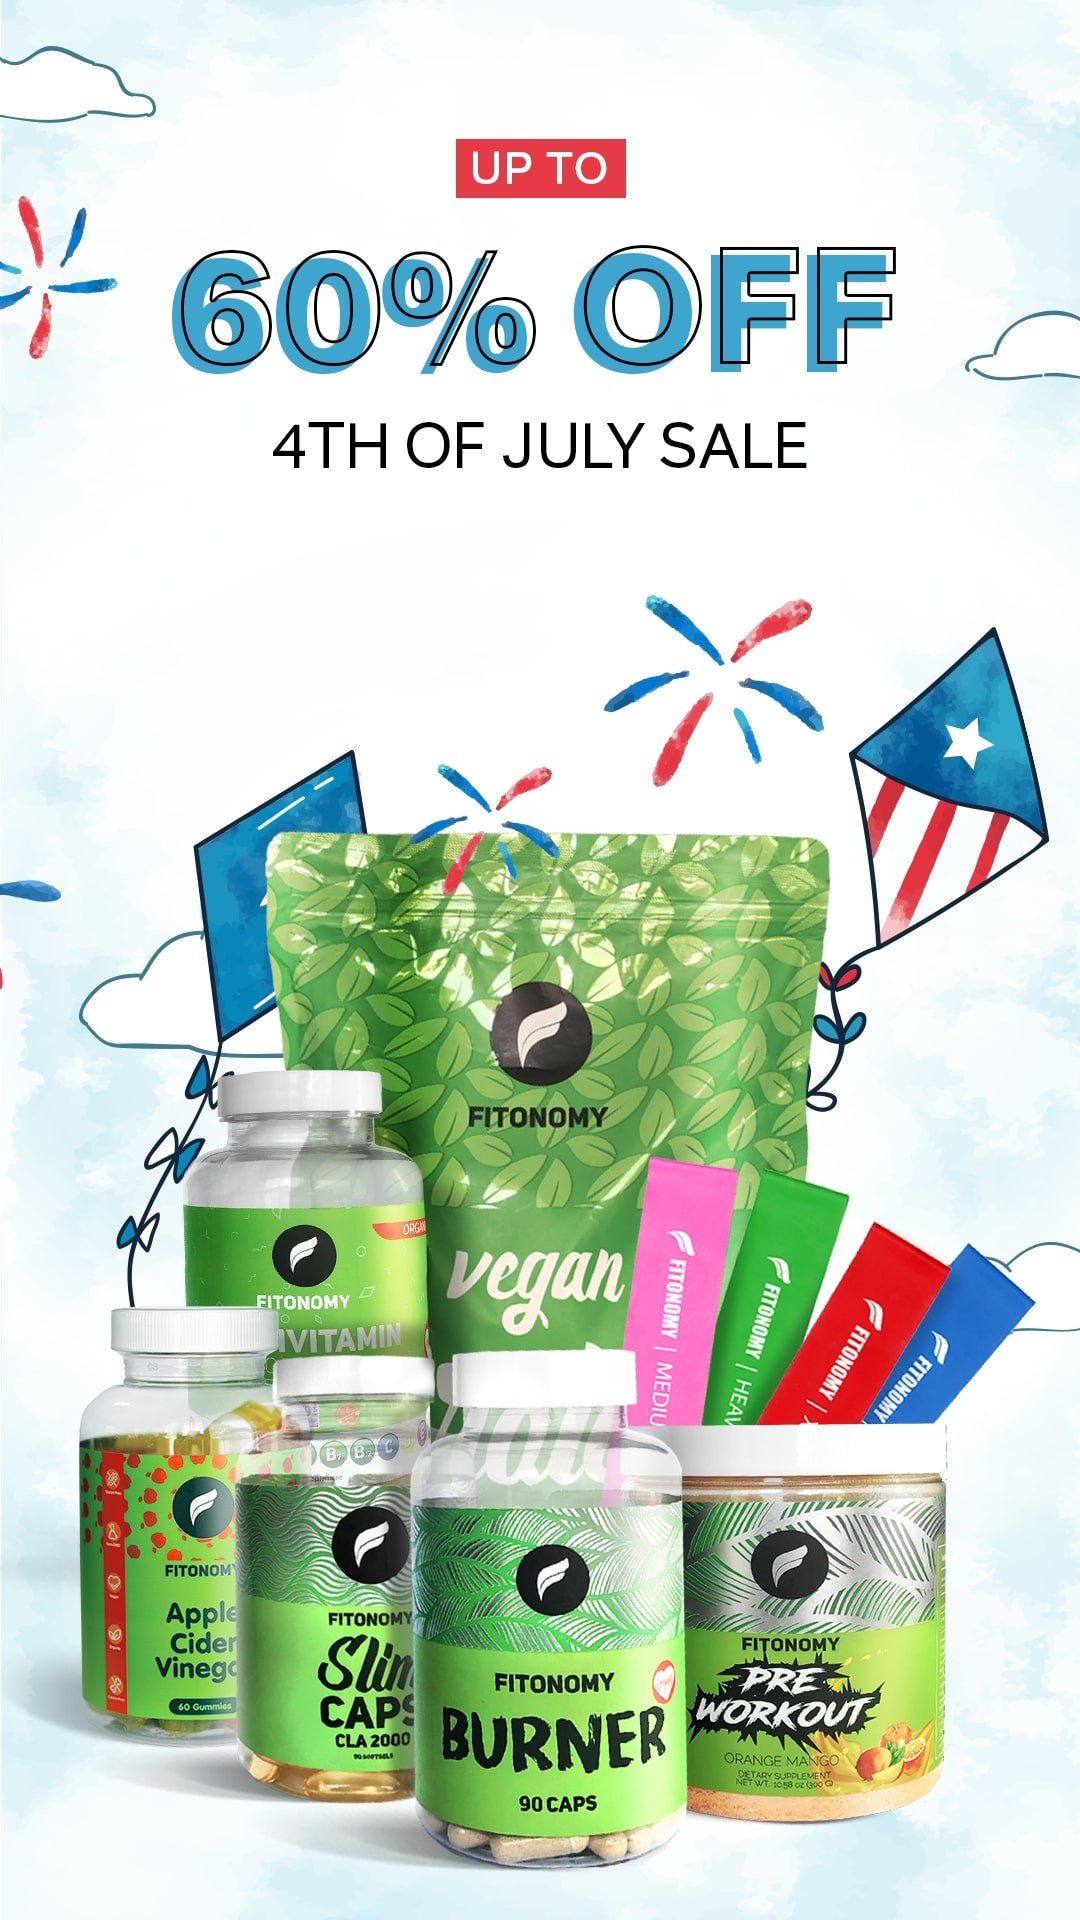 4th of July Sale- Fitonomy products